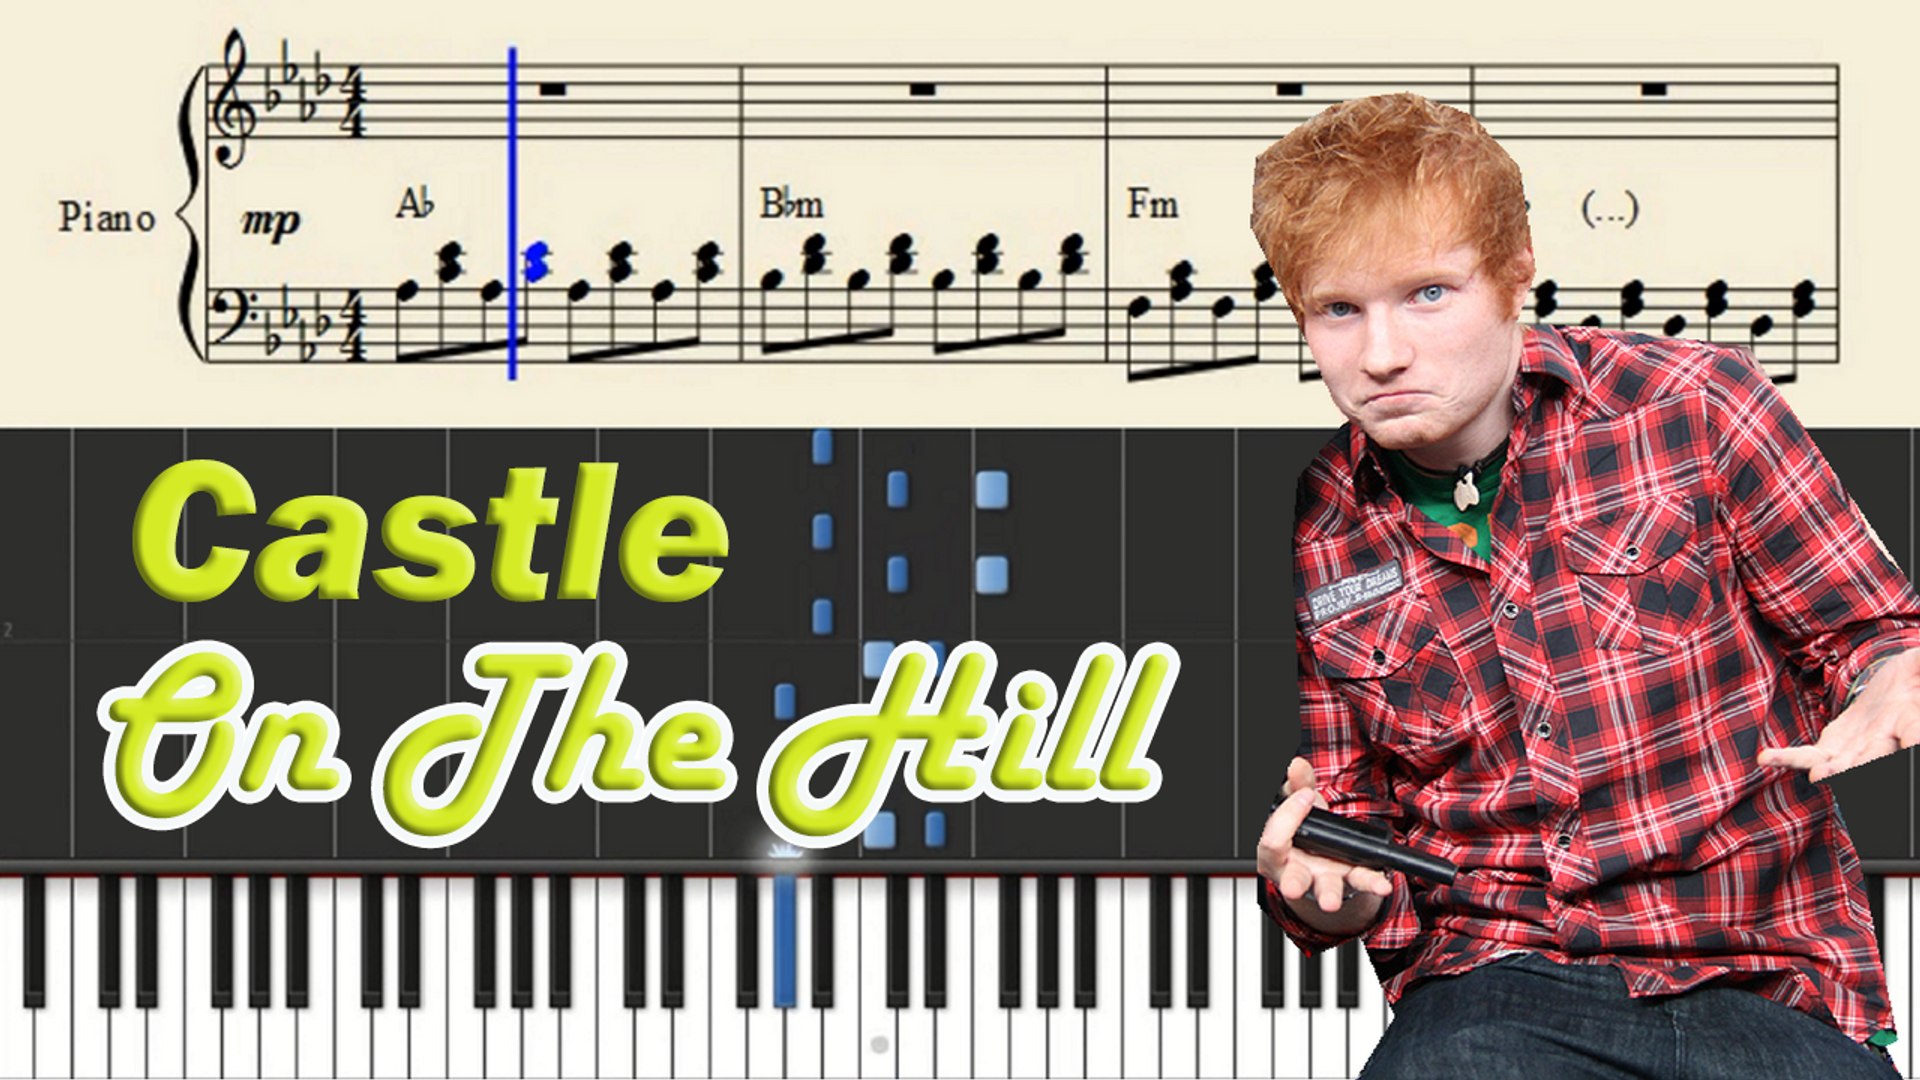 Castle On The Hill - Piano Tutorial + SHEETS - Ed Sheeran Lyrics - Synthesia Music Lesson - YouTube